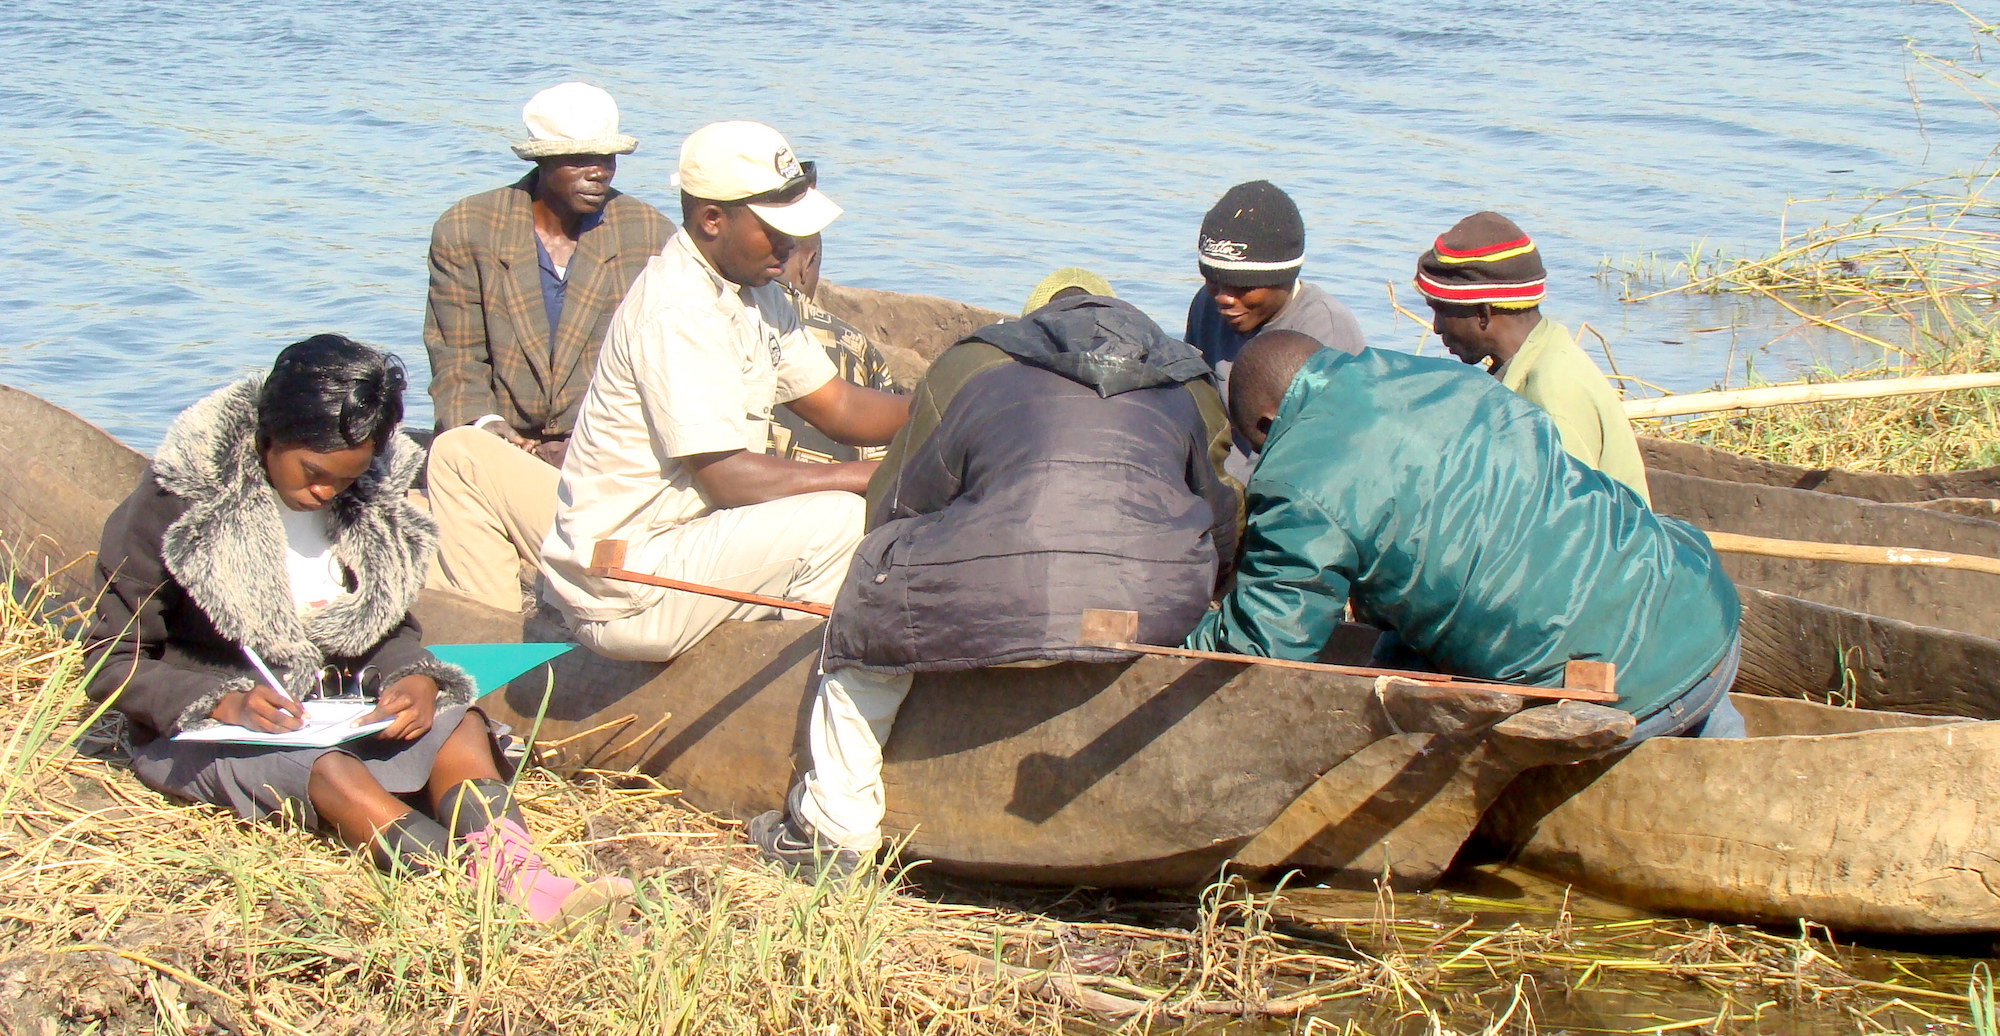 Community members monitoring fish catches by local fishermen.